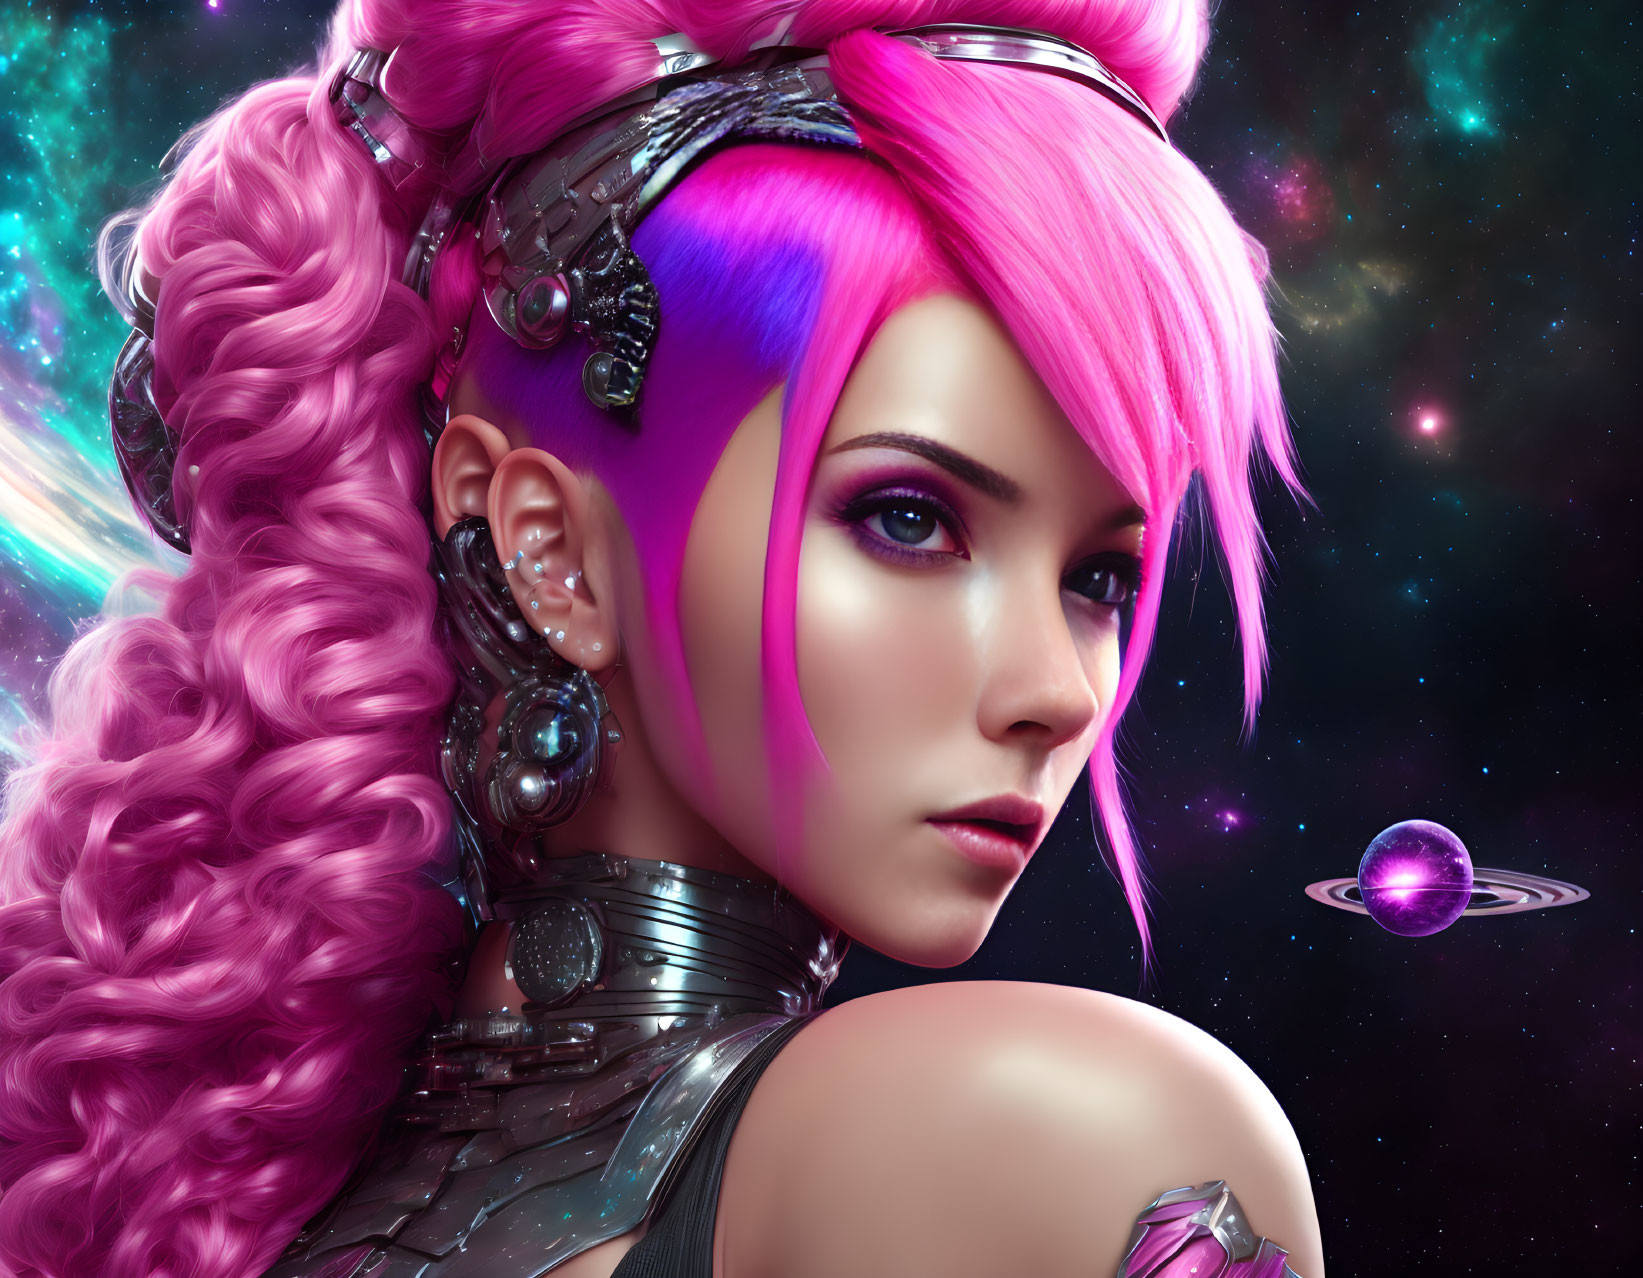 Futuristic digital artwork of woman with pink hair and cybernetic enhancements in cosmic setting